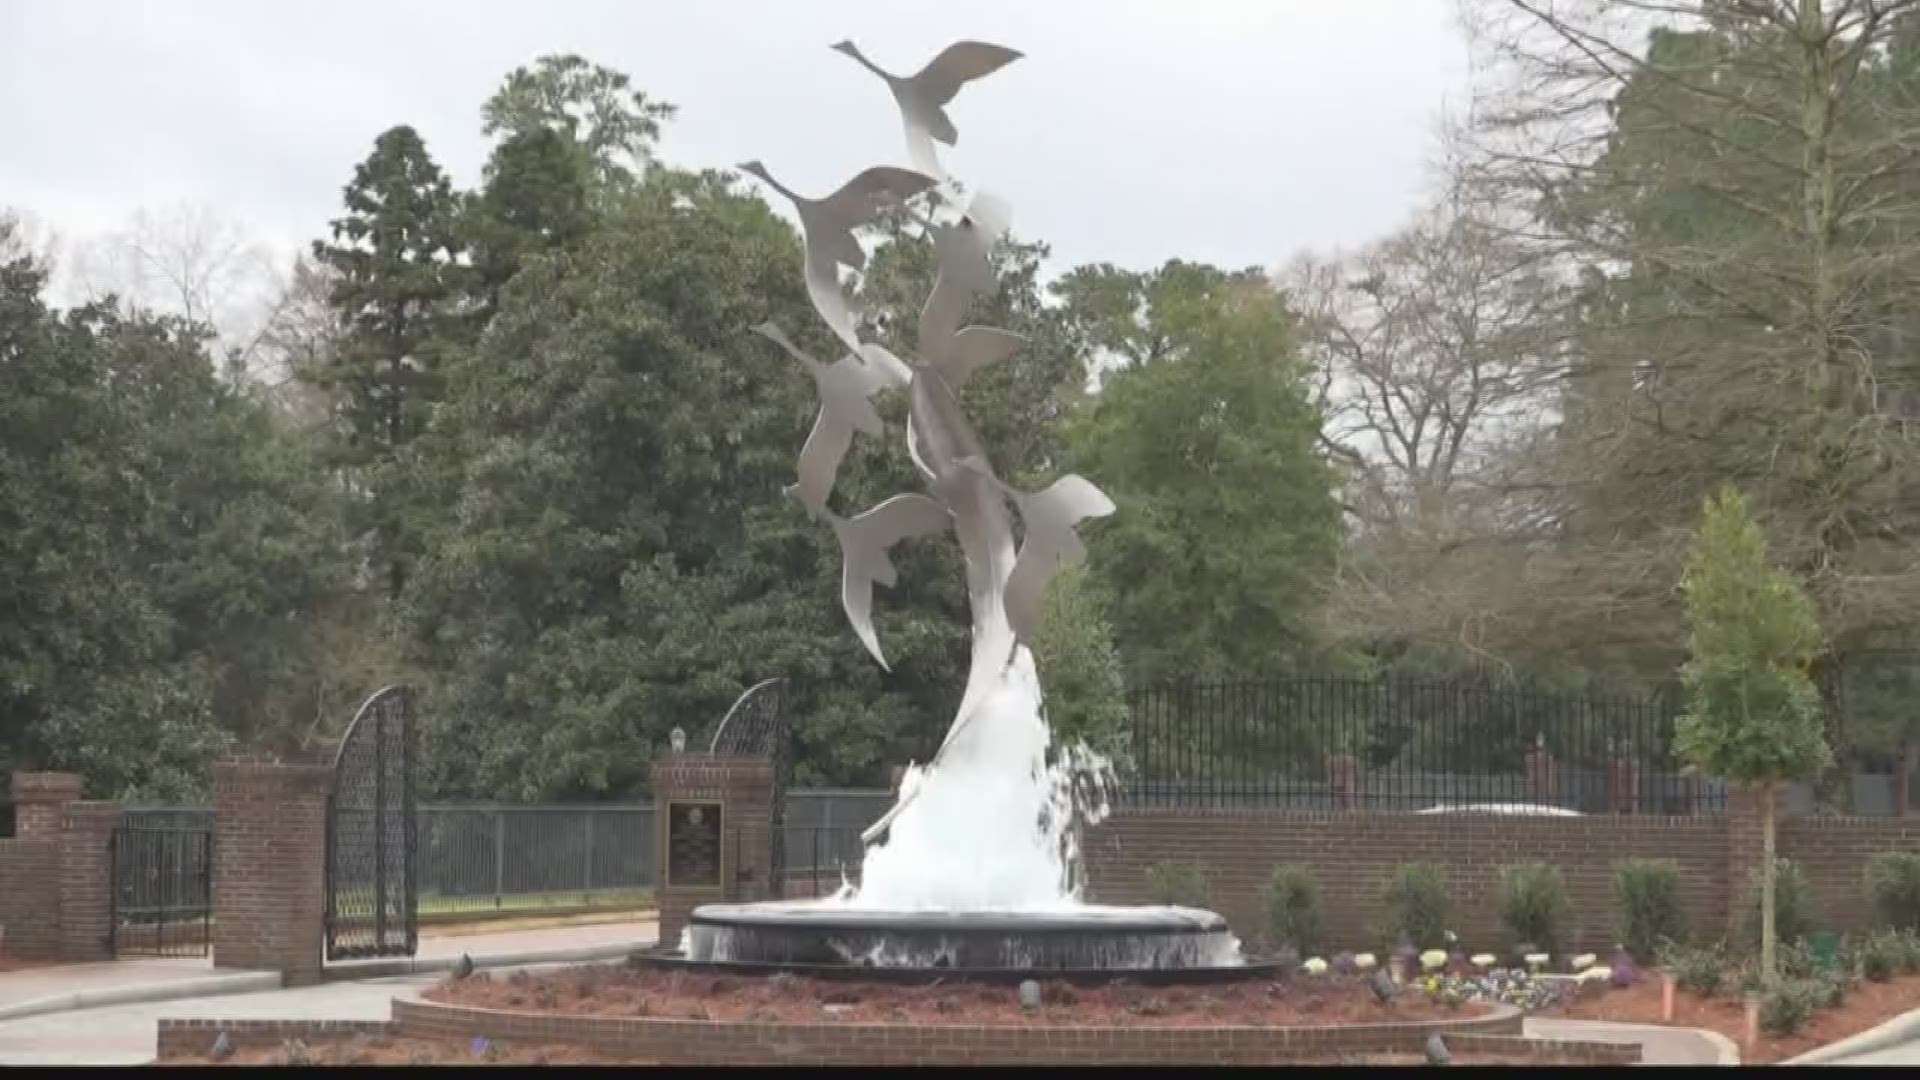 The 24-foot sculpture, 'Seven Swans' is finally complete.